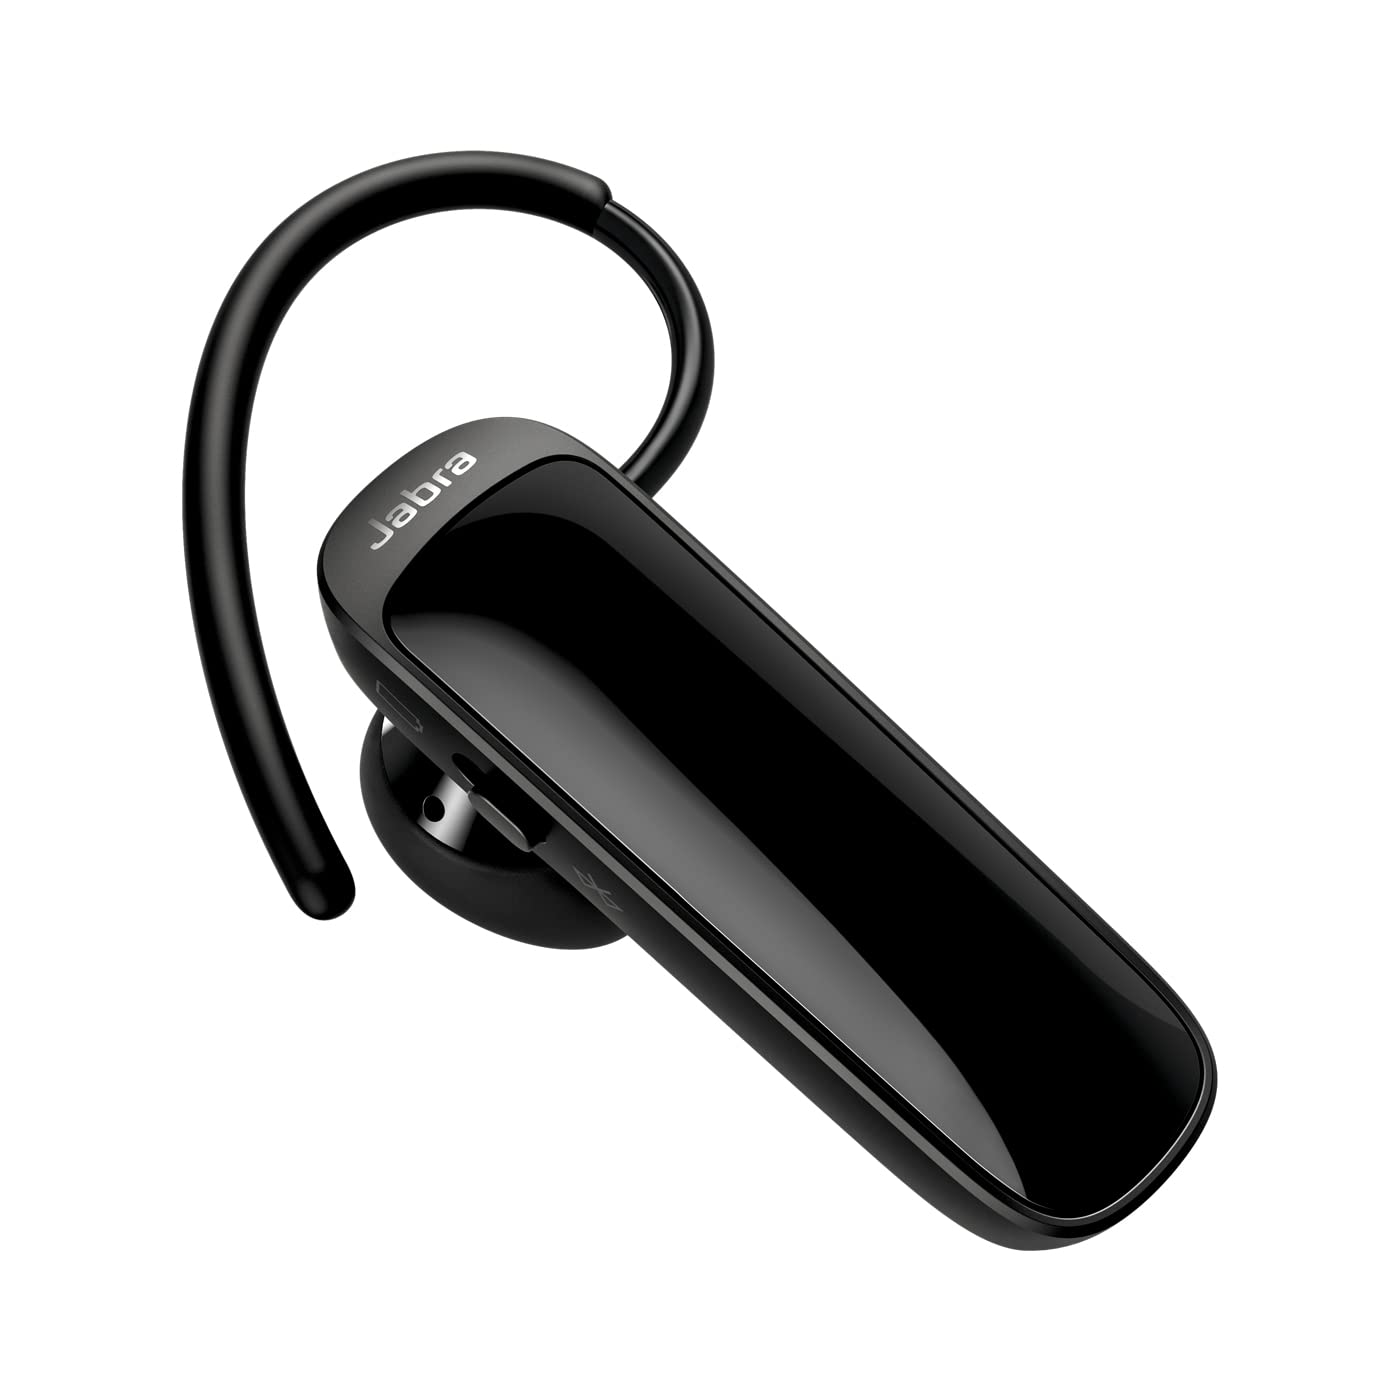 Jabra Talk 25 SE Mono Bluetooth Headset - Wireless Single Ear Headset with Built-In Microphone, Media Streaming and up to 9 hours Talk Time - Black